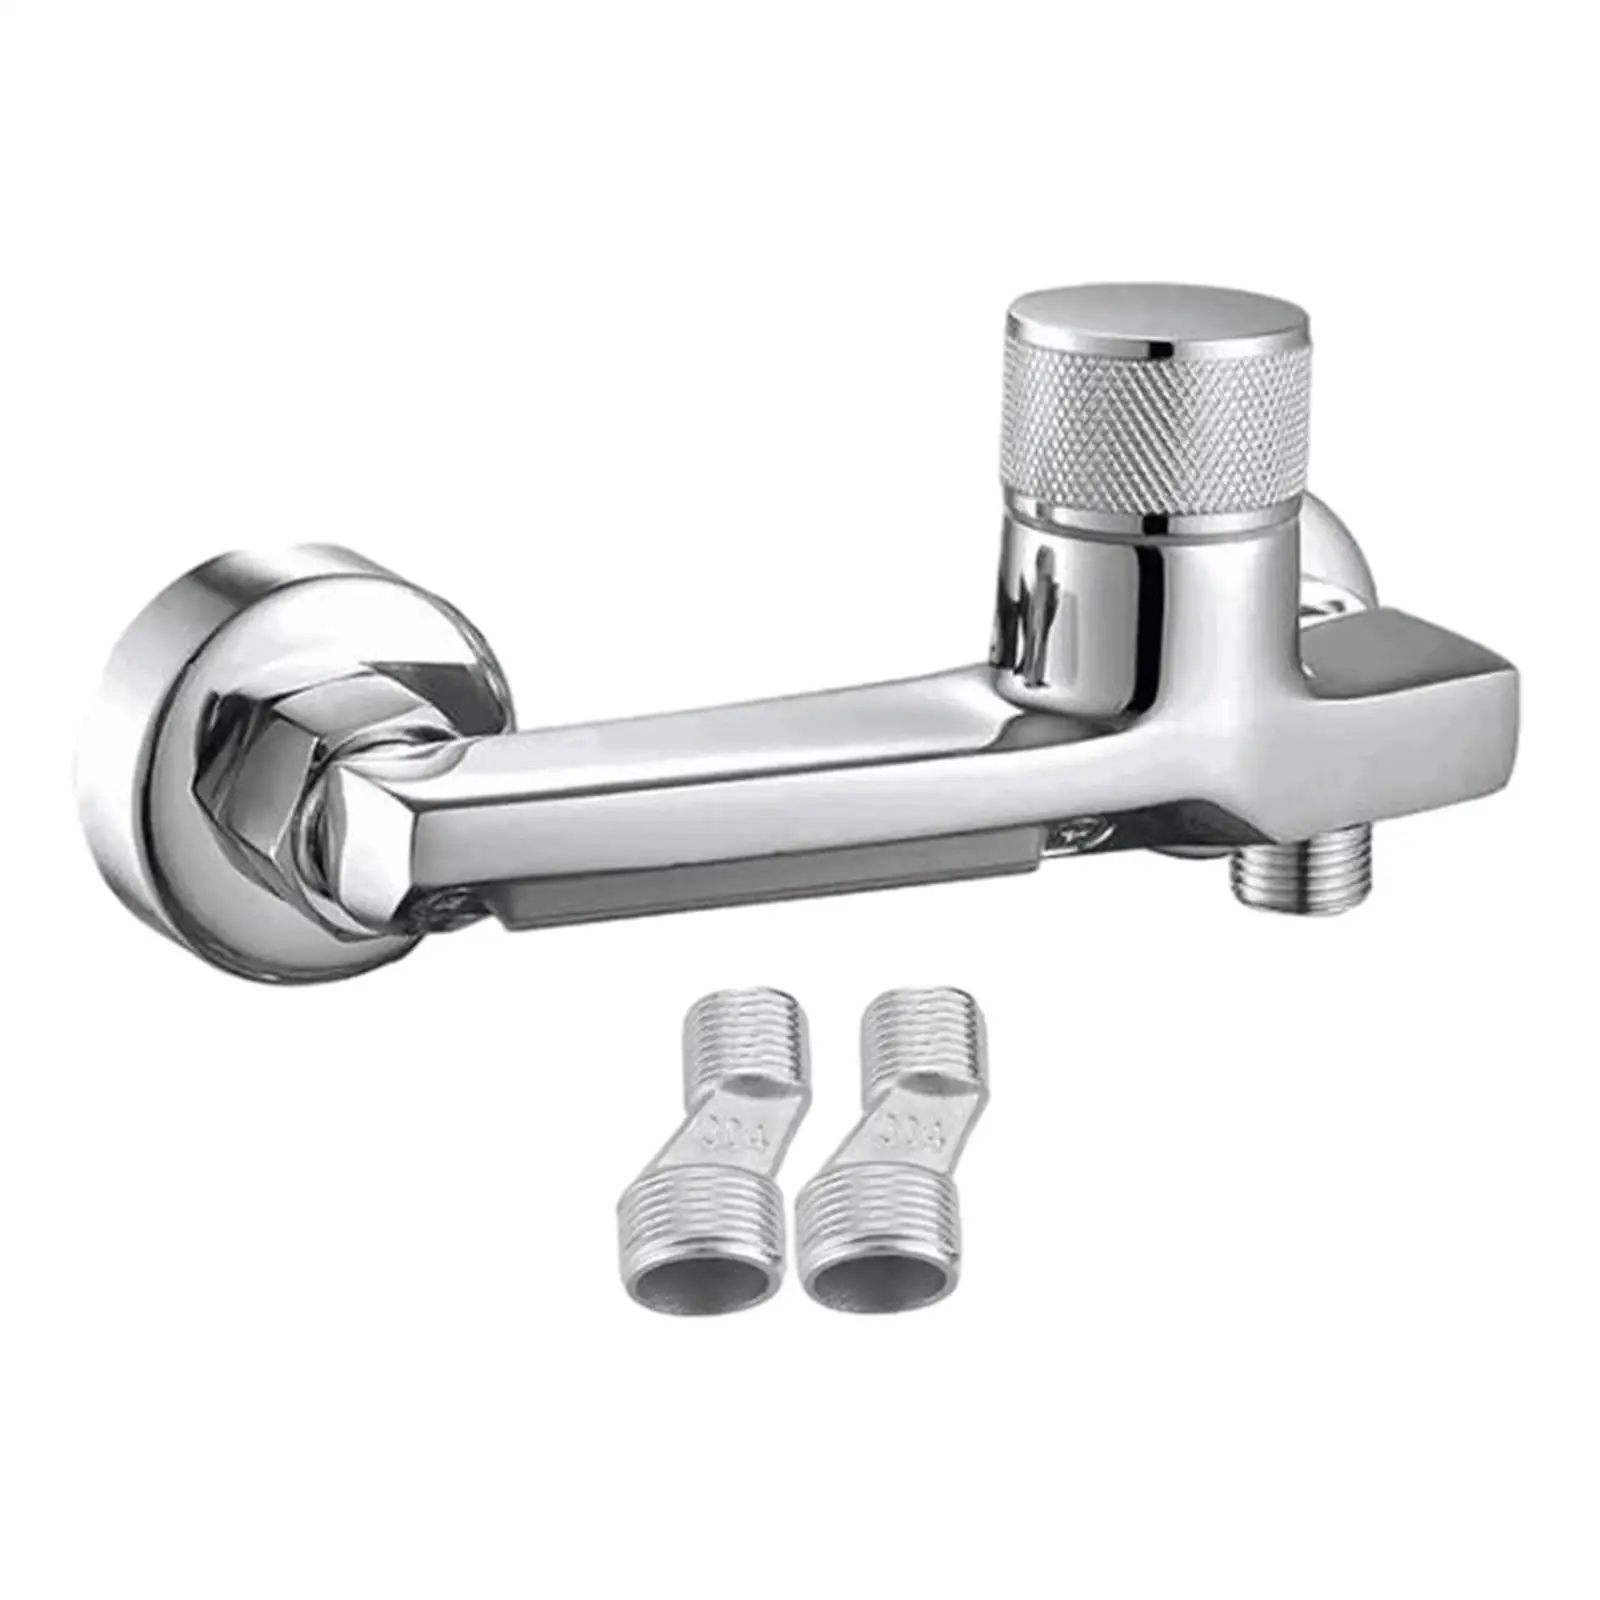 Wall Mounted Shower Faucet, Waterfall Tub Spout Sprayer, Bathroom Accessories for Cold and Hot Water,